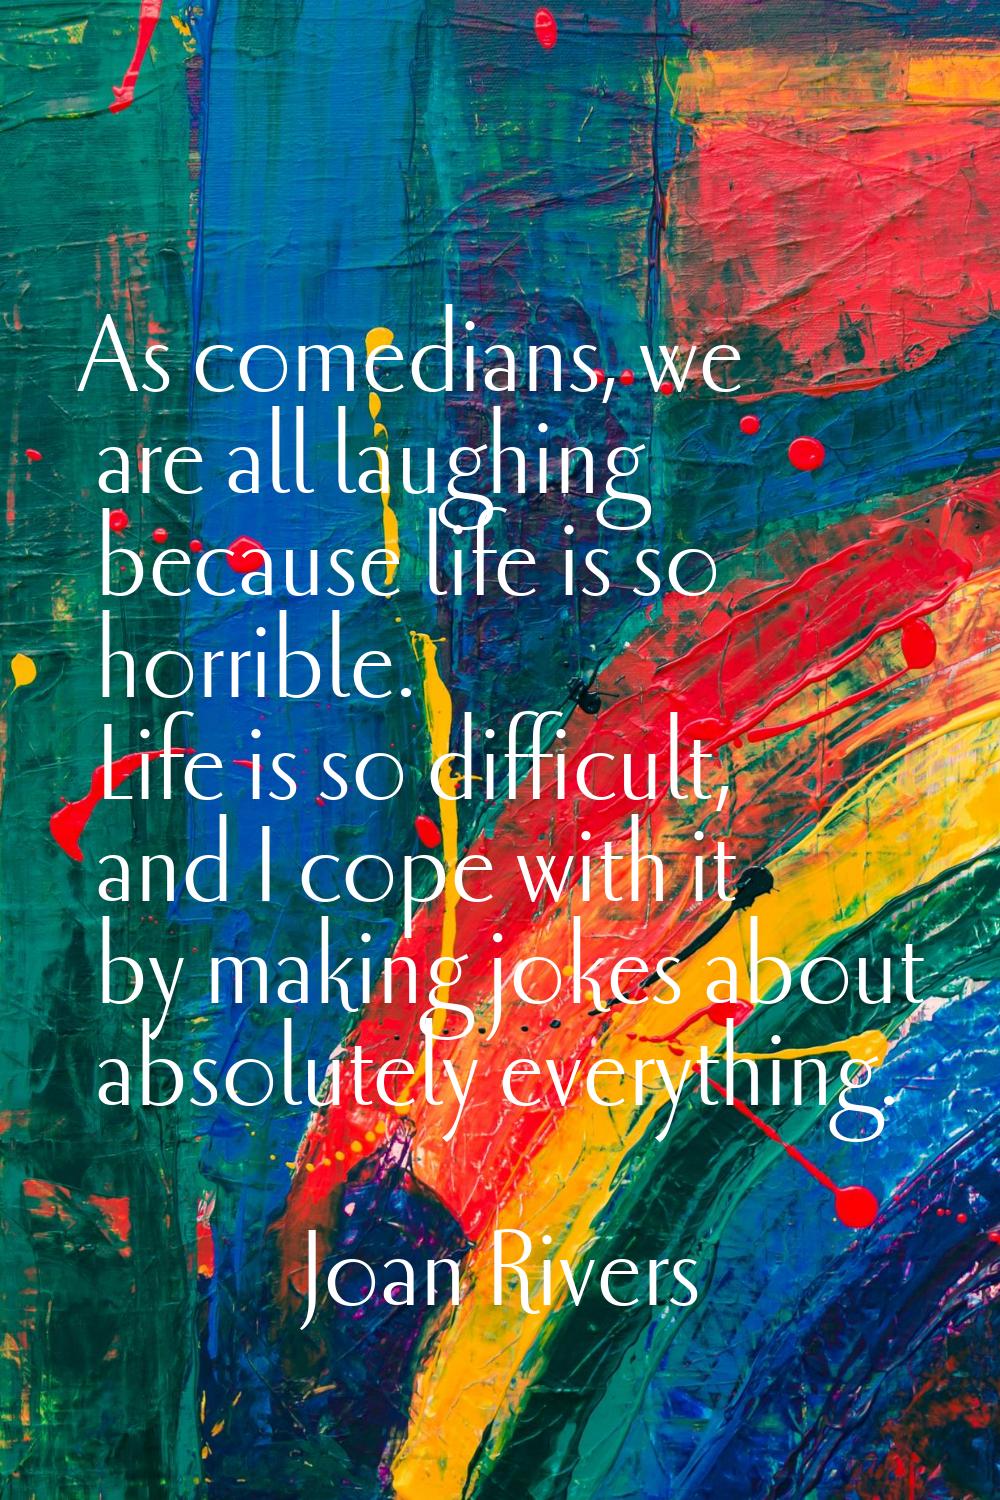 As comedians, we are all laughing because life is so horrible. Life is so difficult, and I cope wit